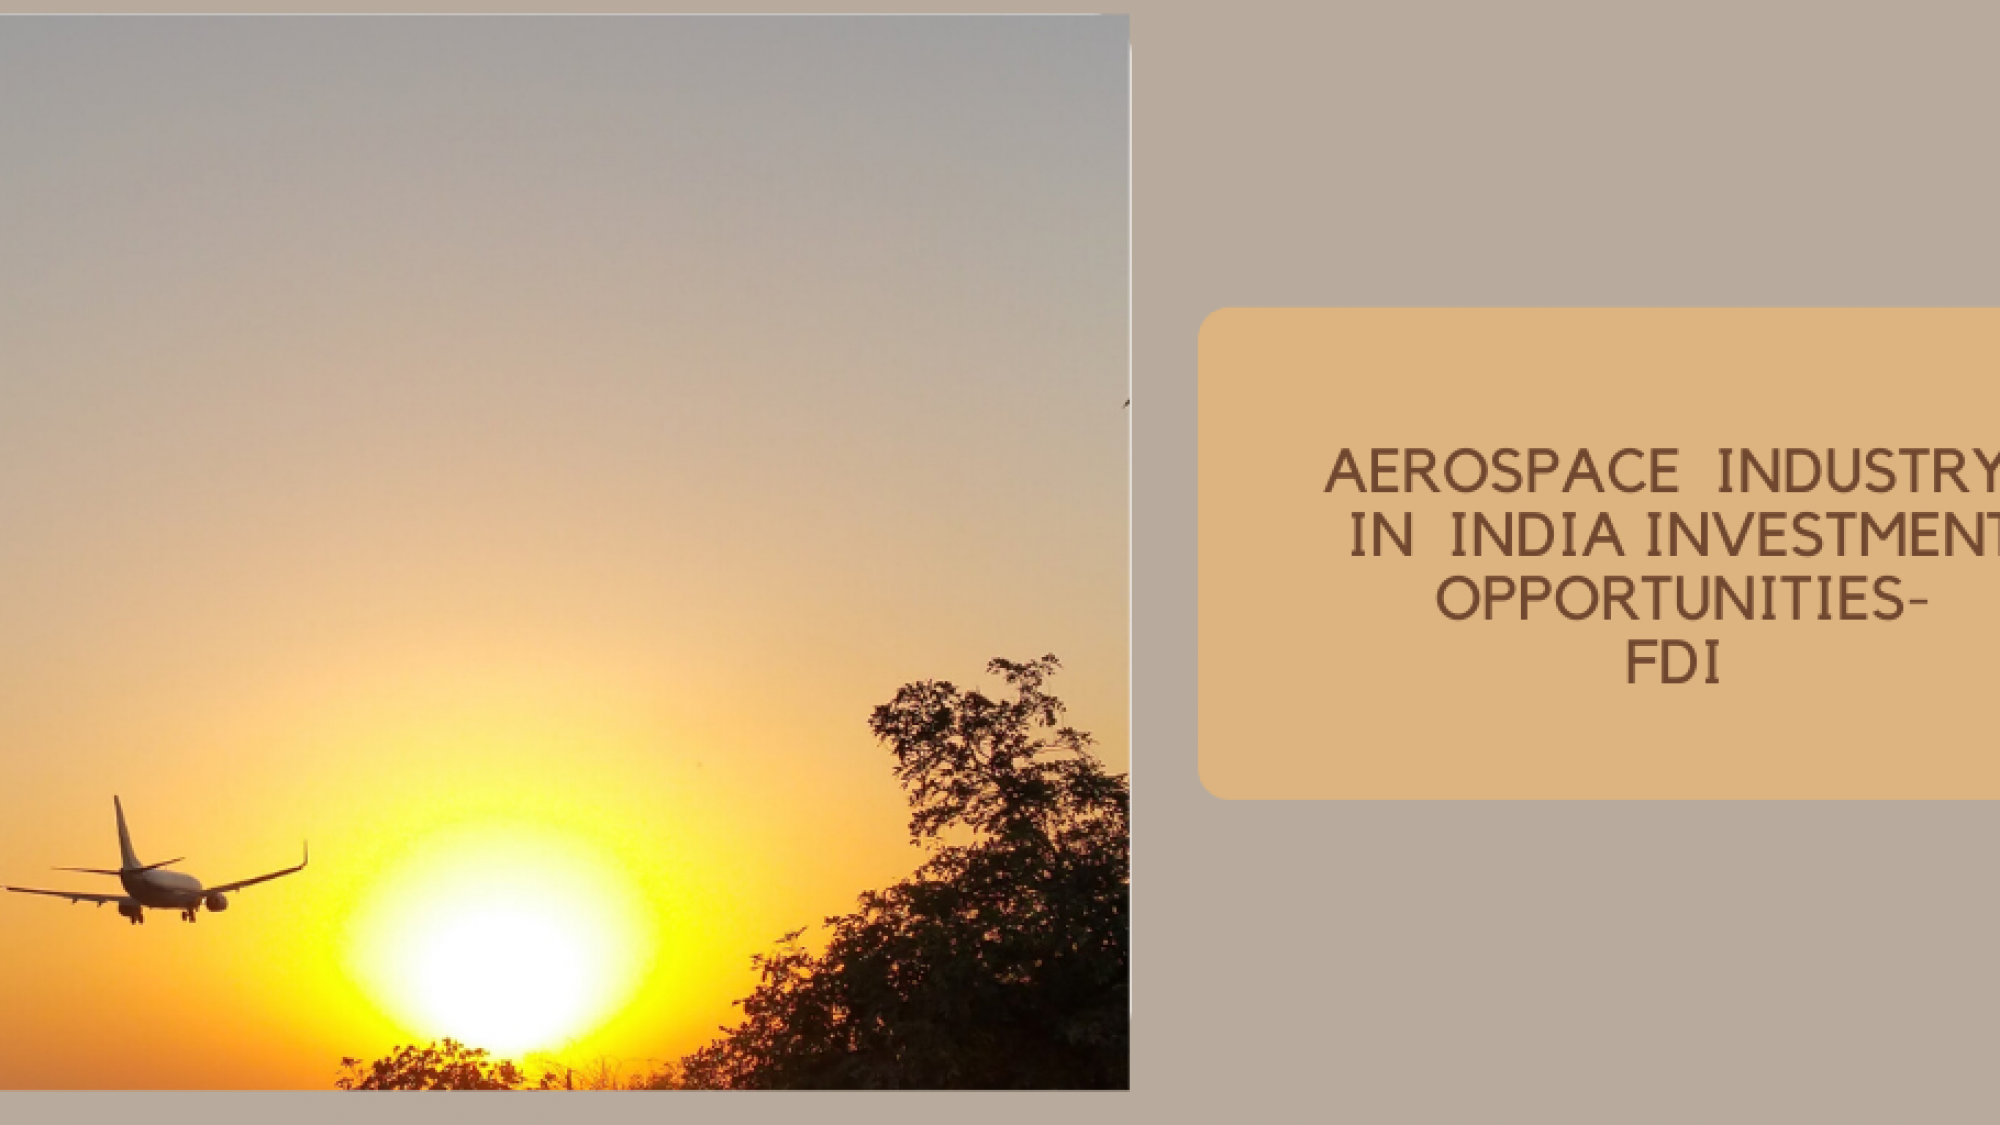 Investment opportunity in india Aerosapce investment apportunity